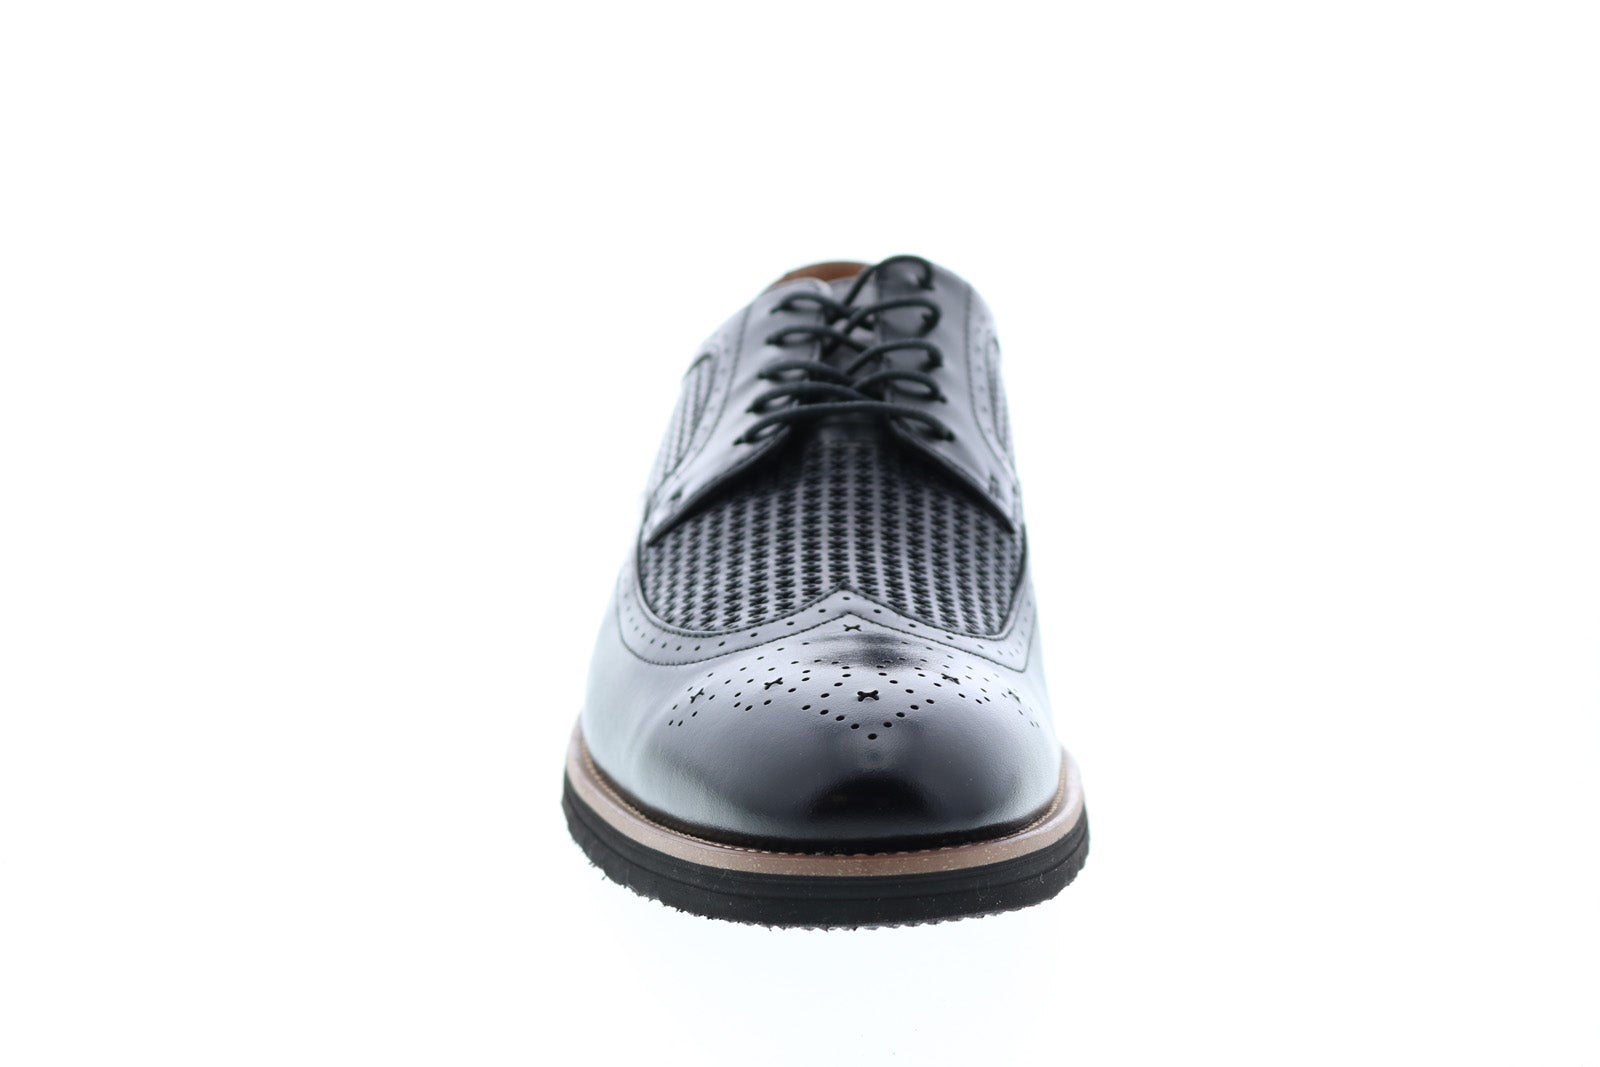 Stacy Adams Emile Leather Wingtip Oxfords Shoes - Black